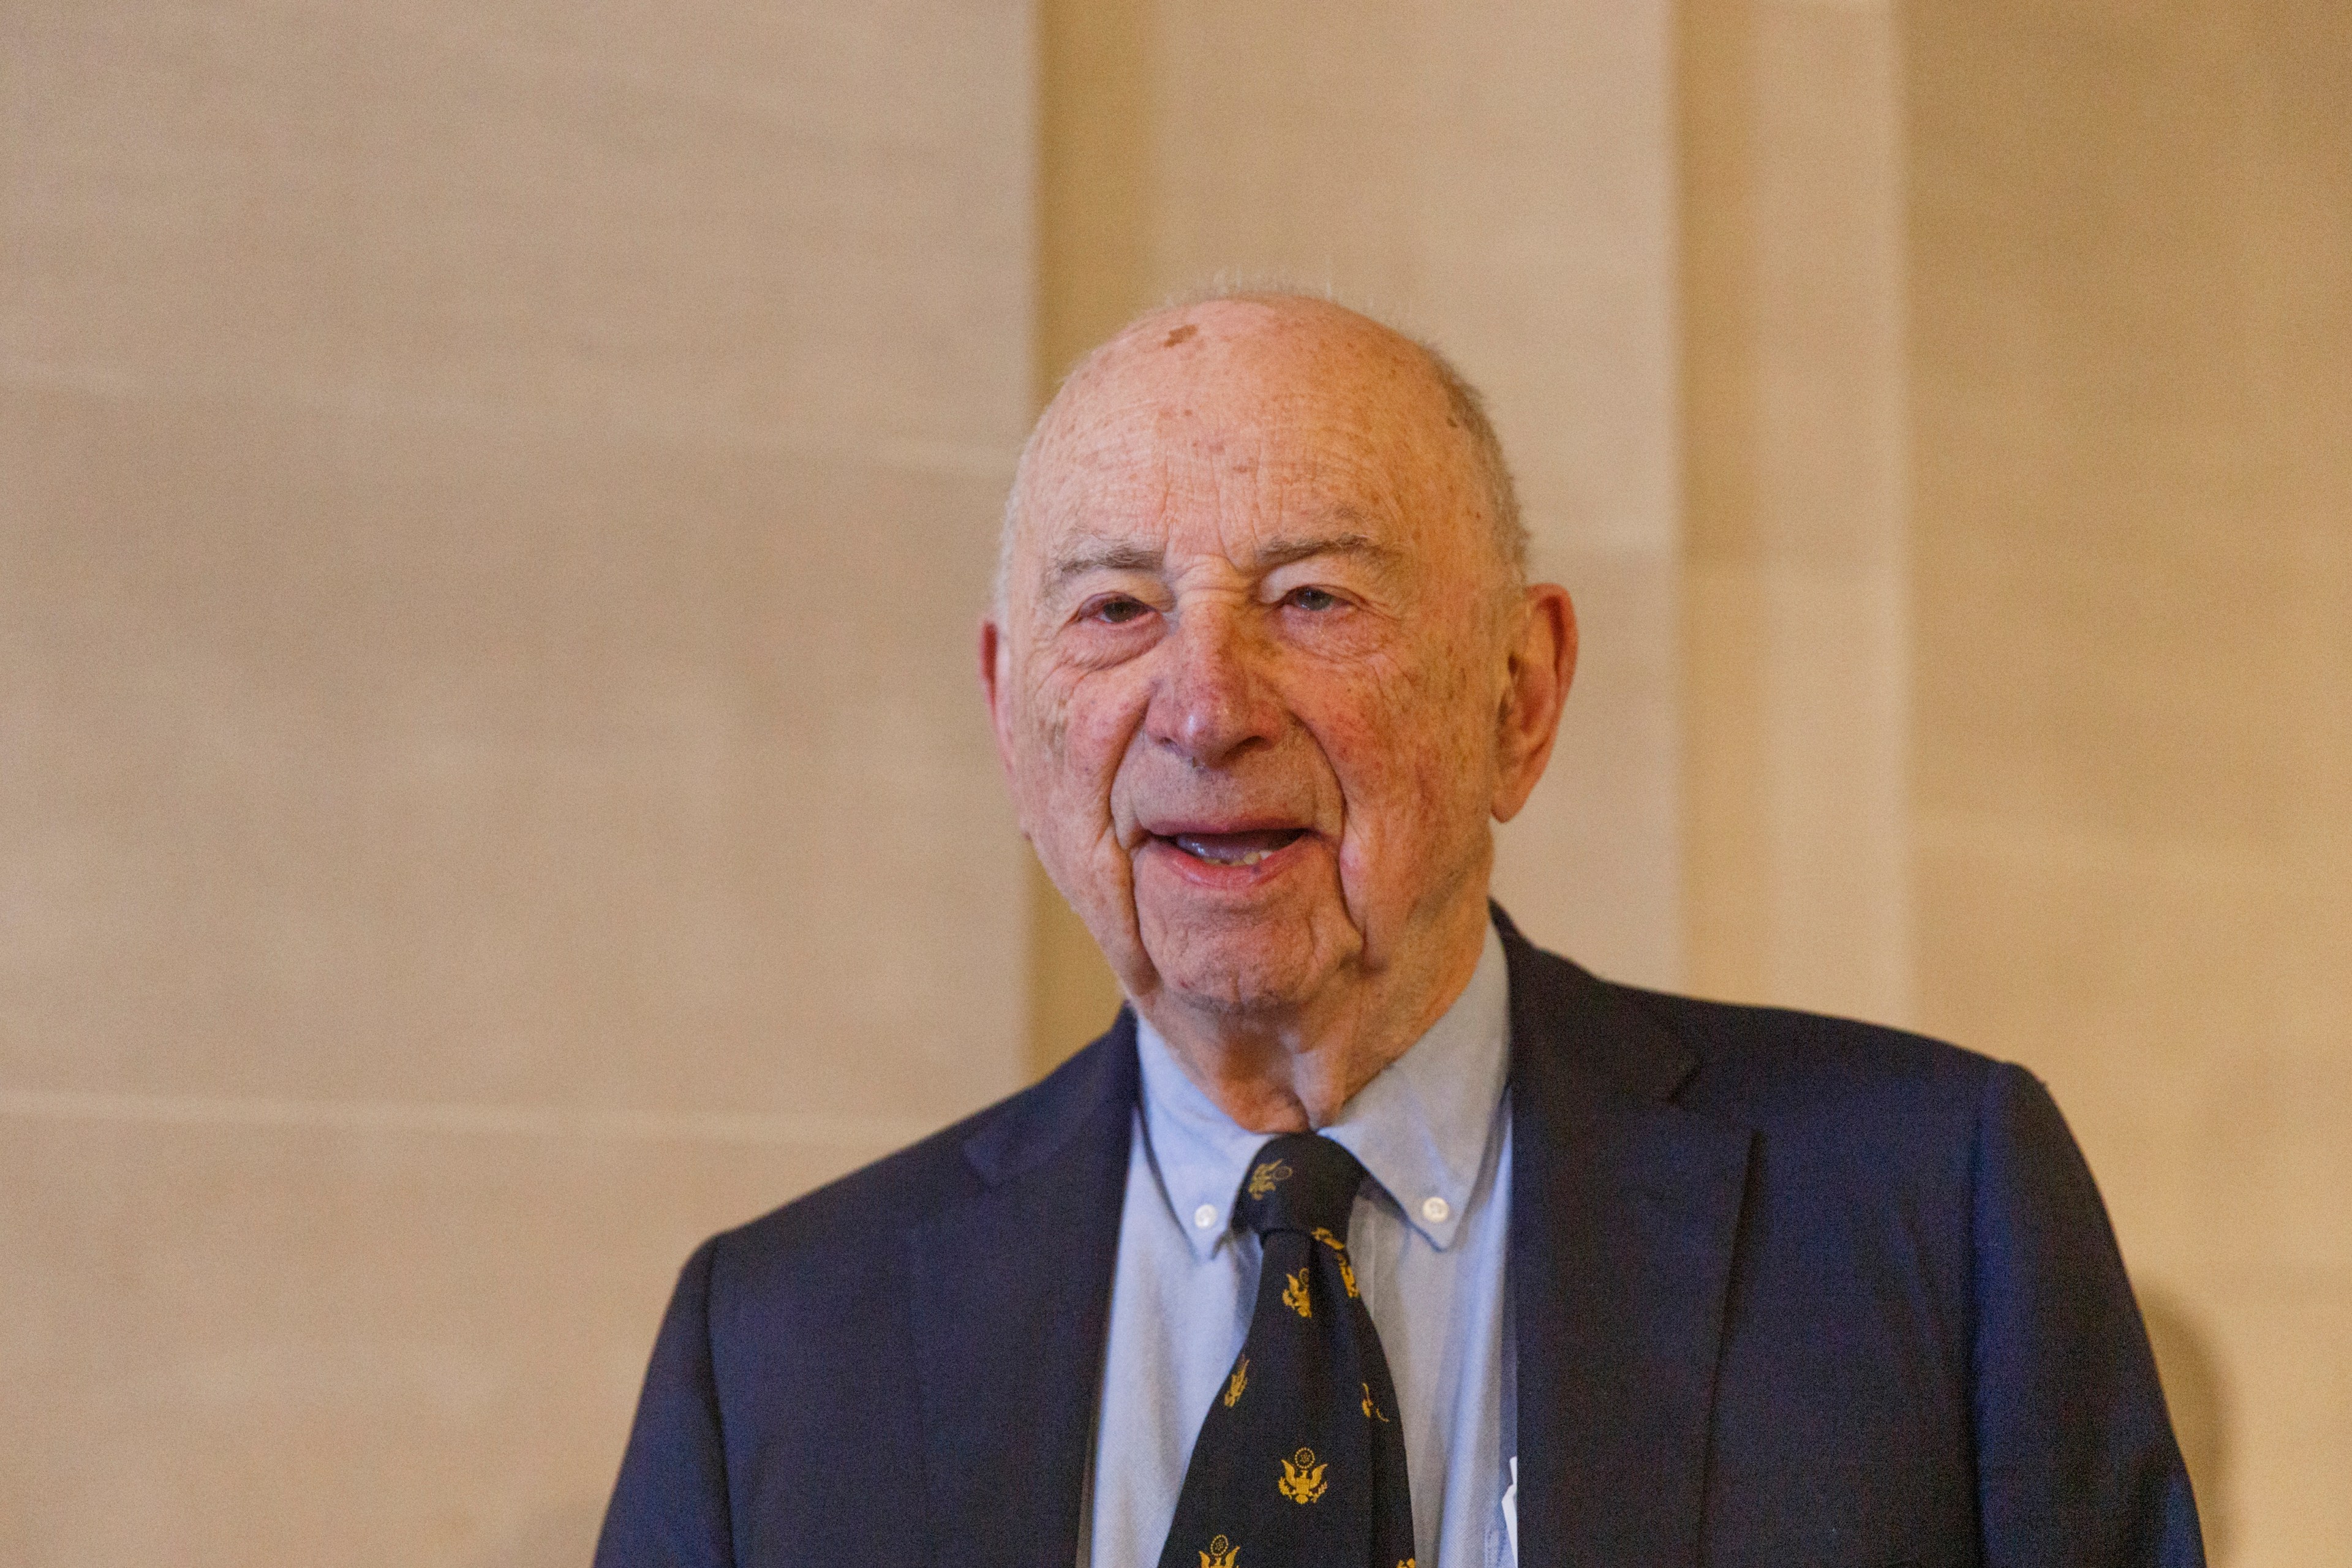 An elderly man with a warm smile, wearing a suit and tie, stands before a light background.